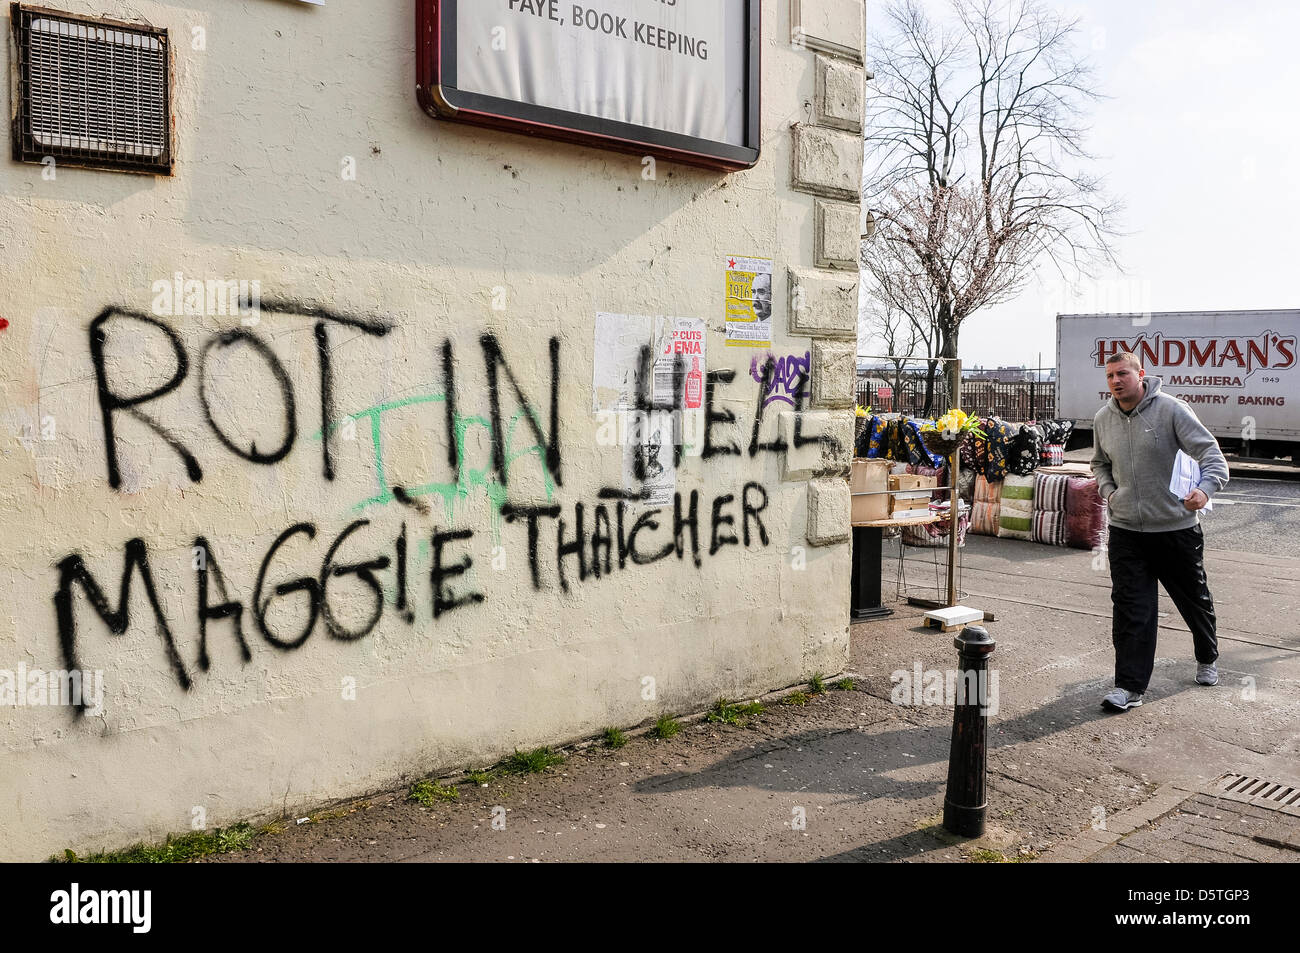 Belfast, UK. 9th April 2013. Following a street party in the area, anti-Thatcher graffiti appears on walls throughout West Belfast. Credit: Stephen Barnes / Alamy Live News Stock Photo